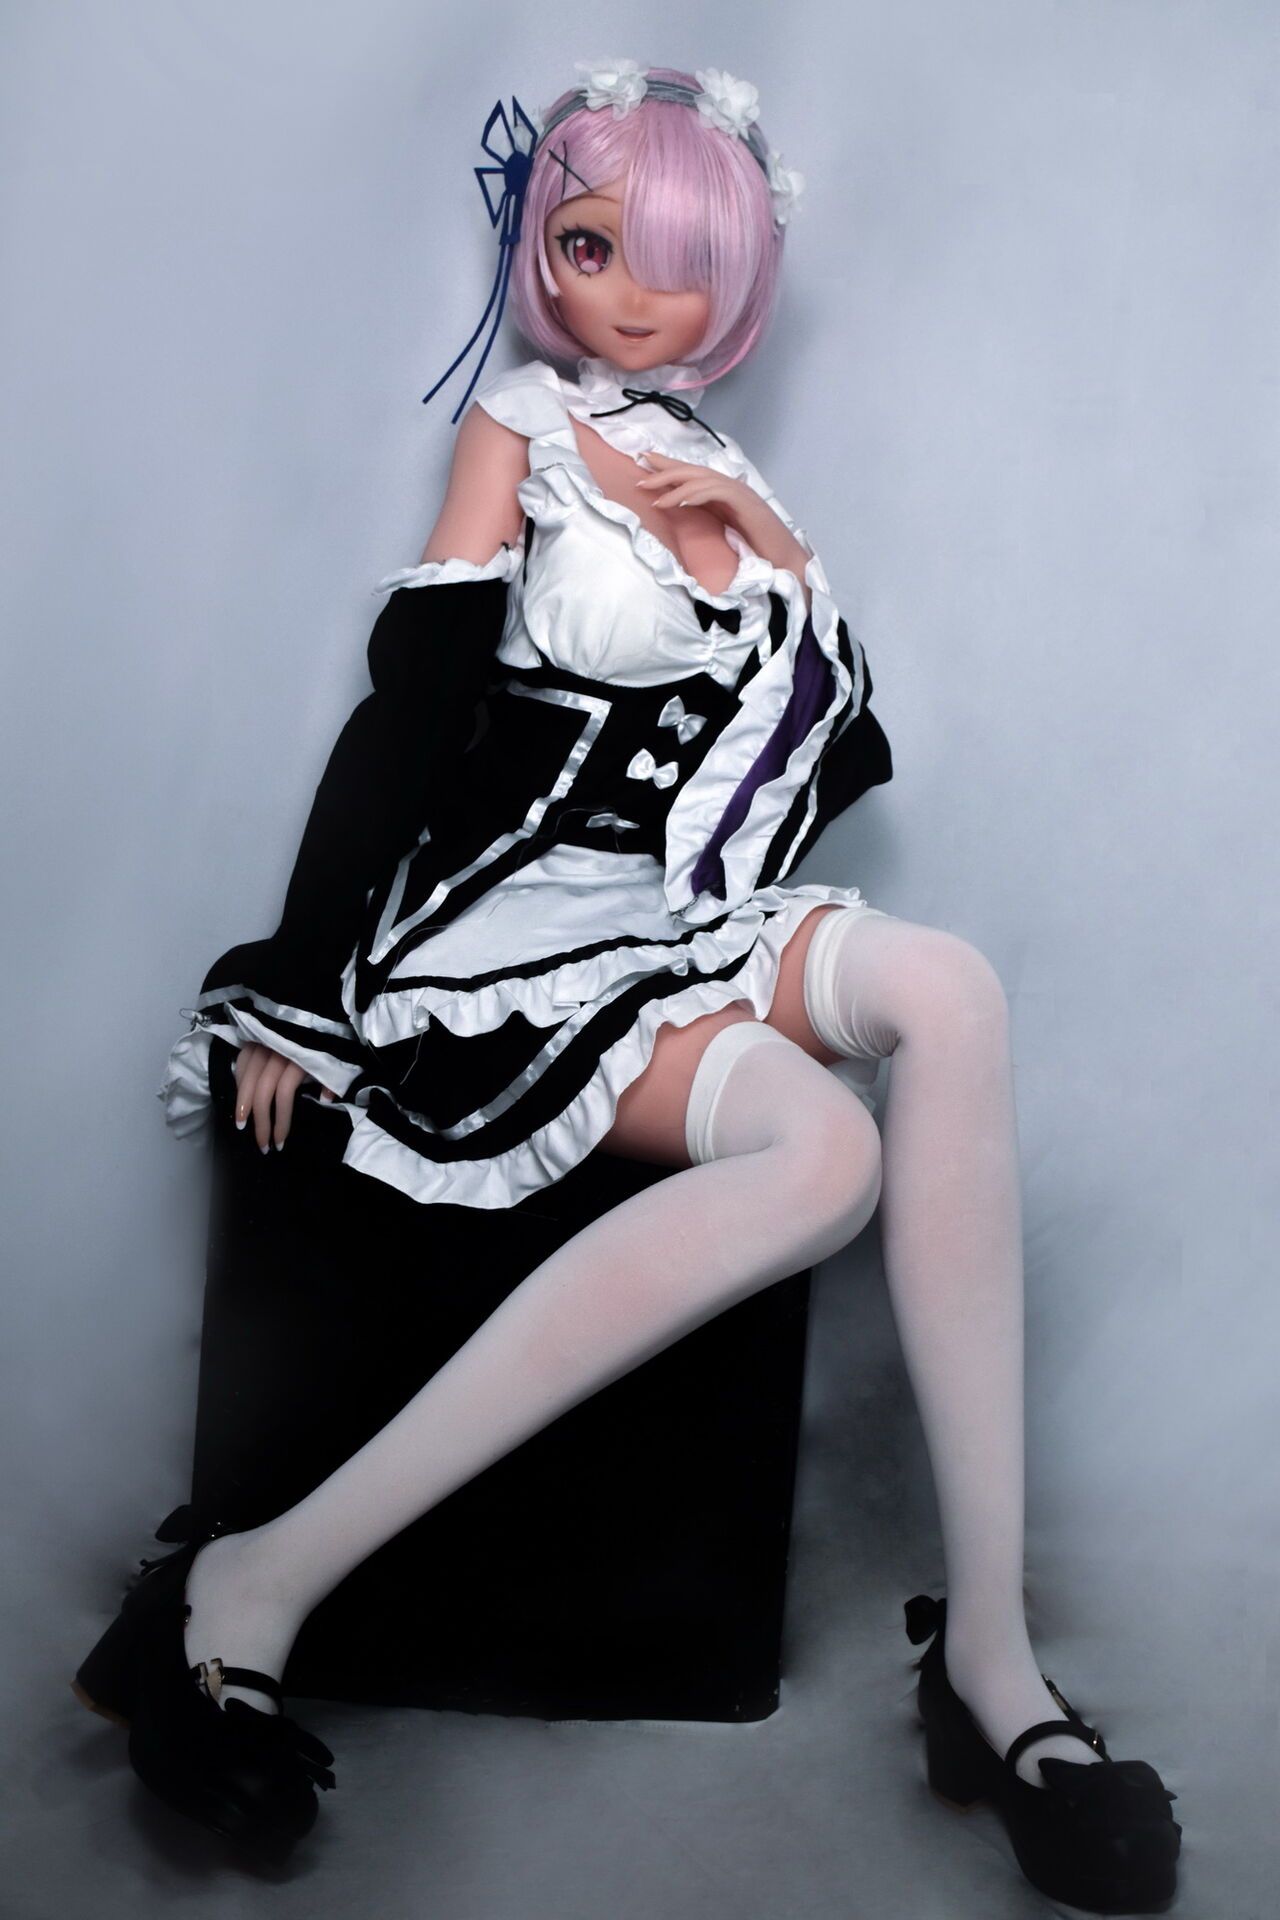 Elsa Babe [148CM AHR006 Mishima Miyo] 12% off the first launch of new doll! 2022.06.14 12